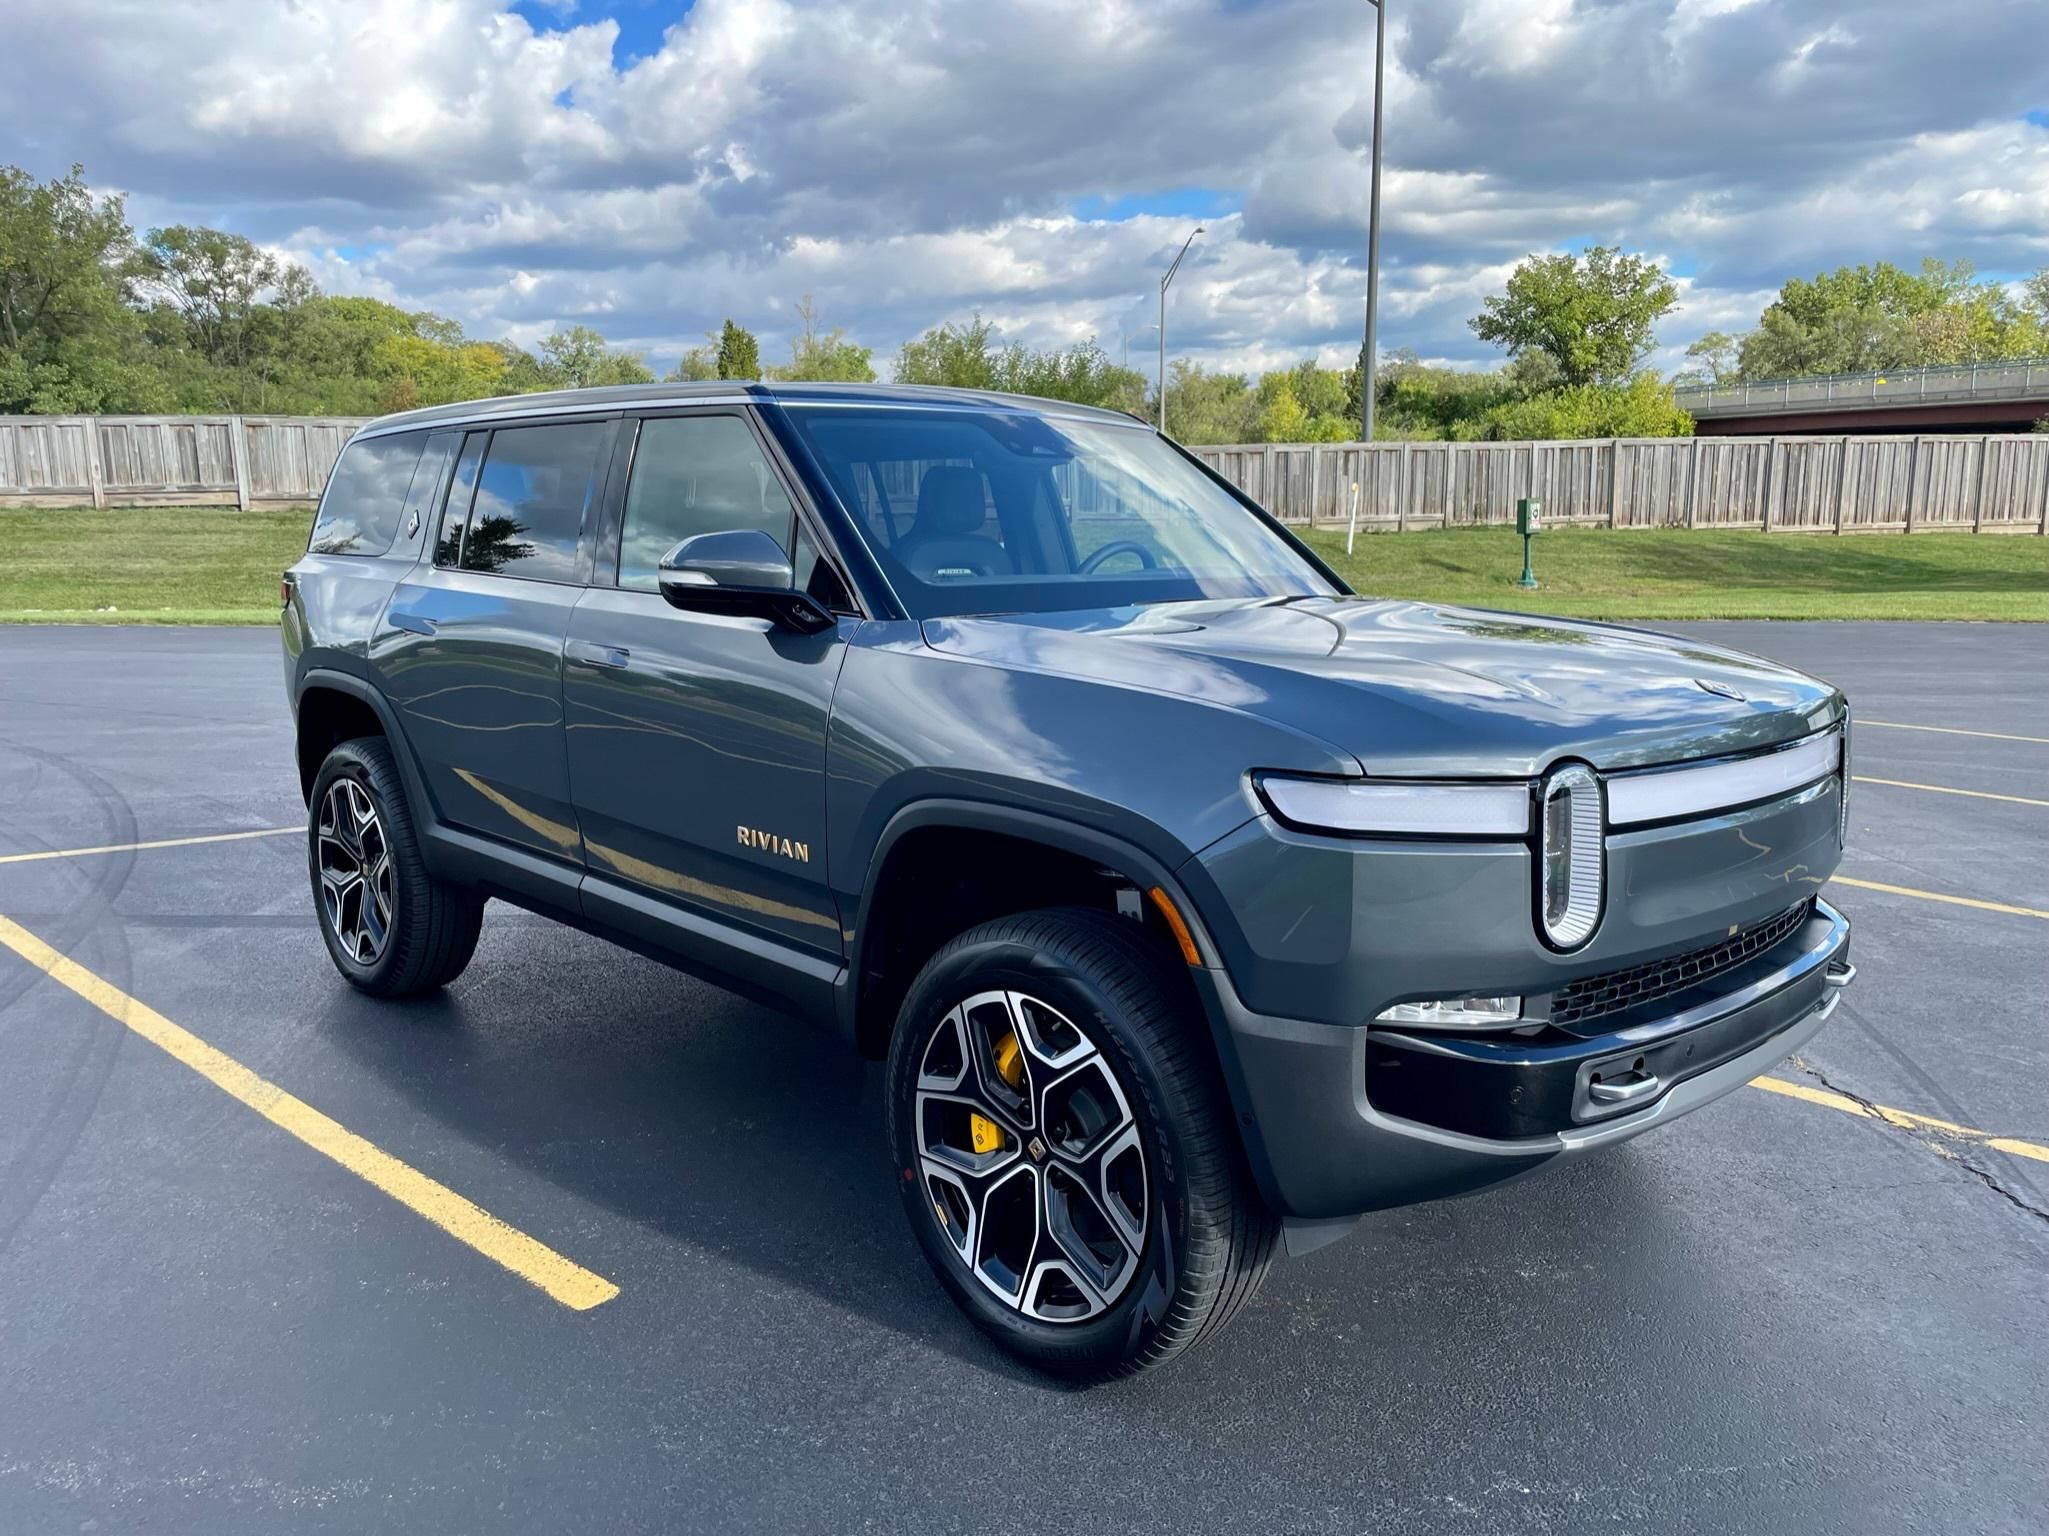 Don't Risk Reselling Your Rivian R1T Launch Edition Reservation - Here's Why